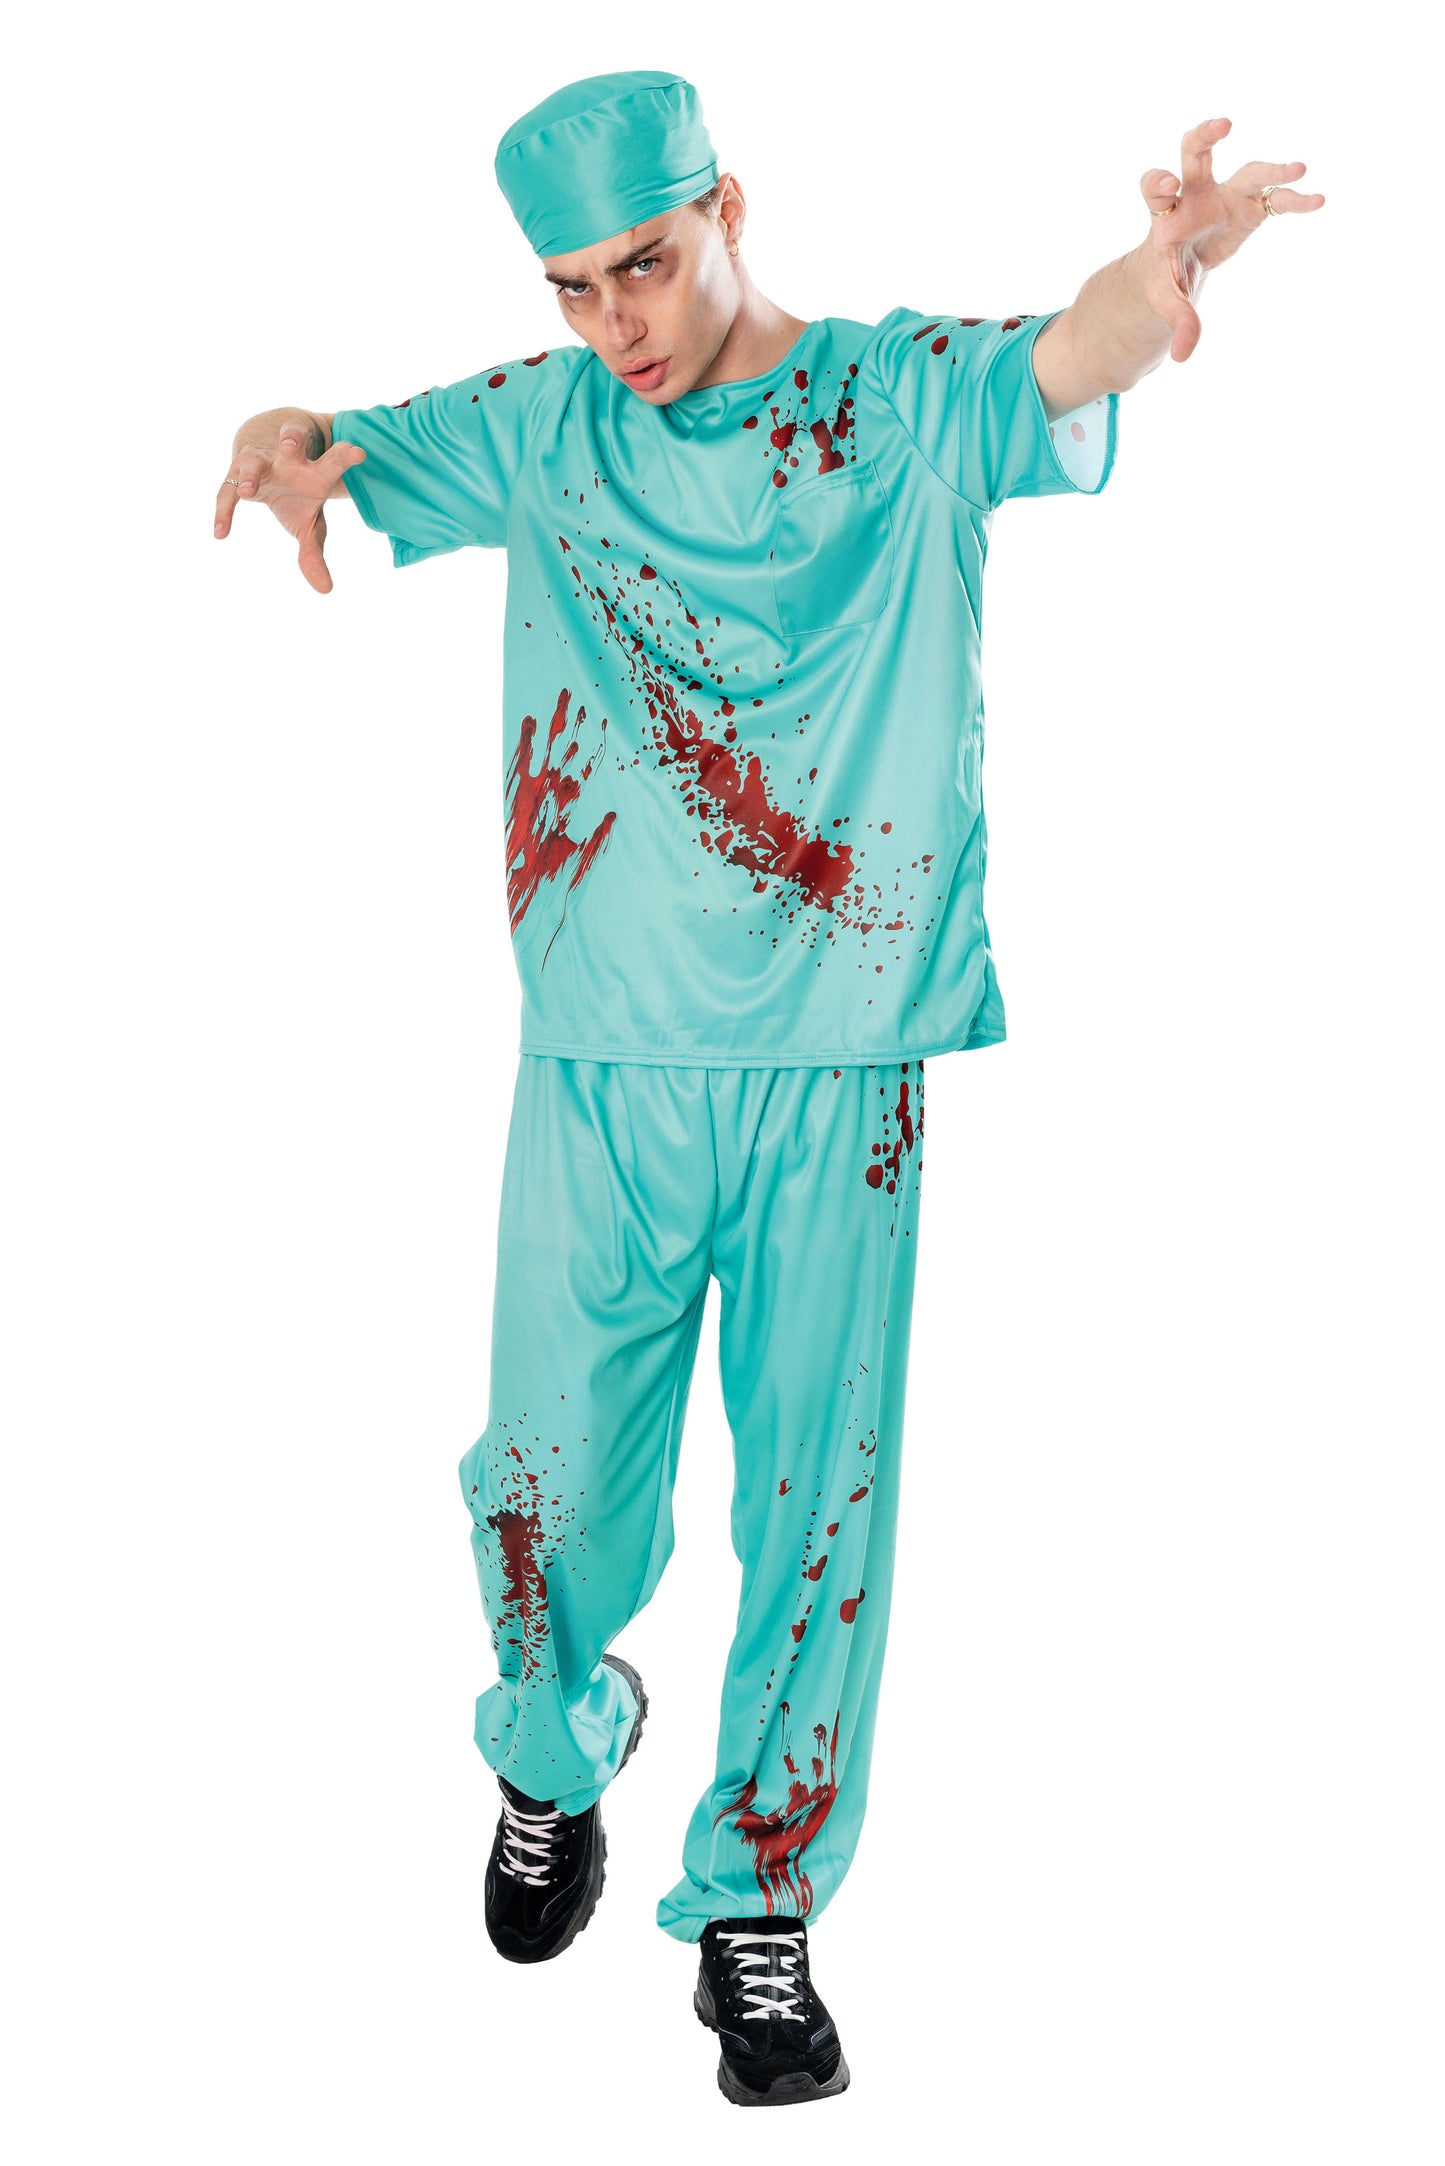 Bloody Doctor Costume Mens